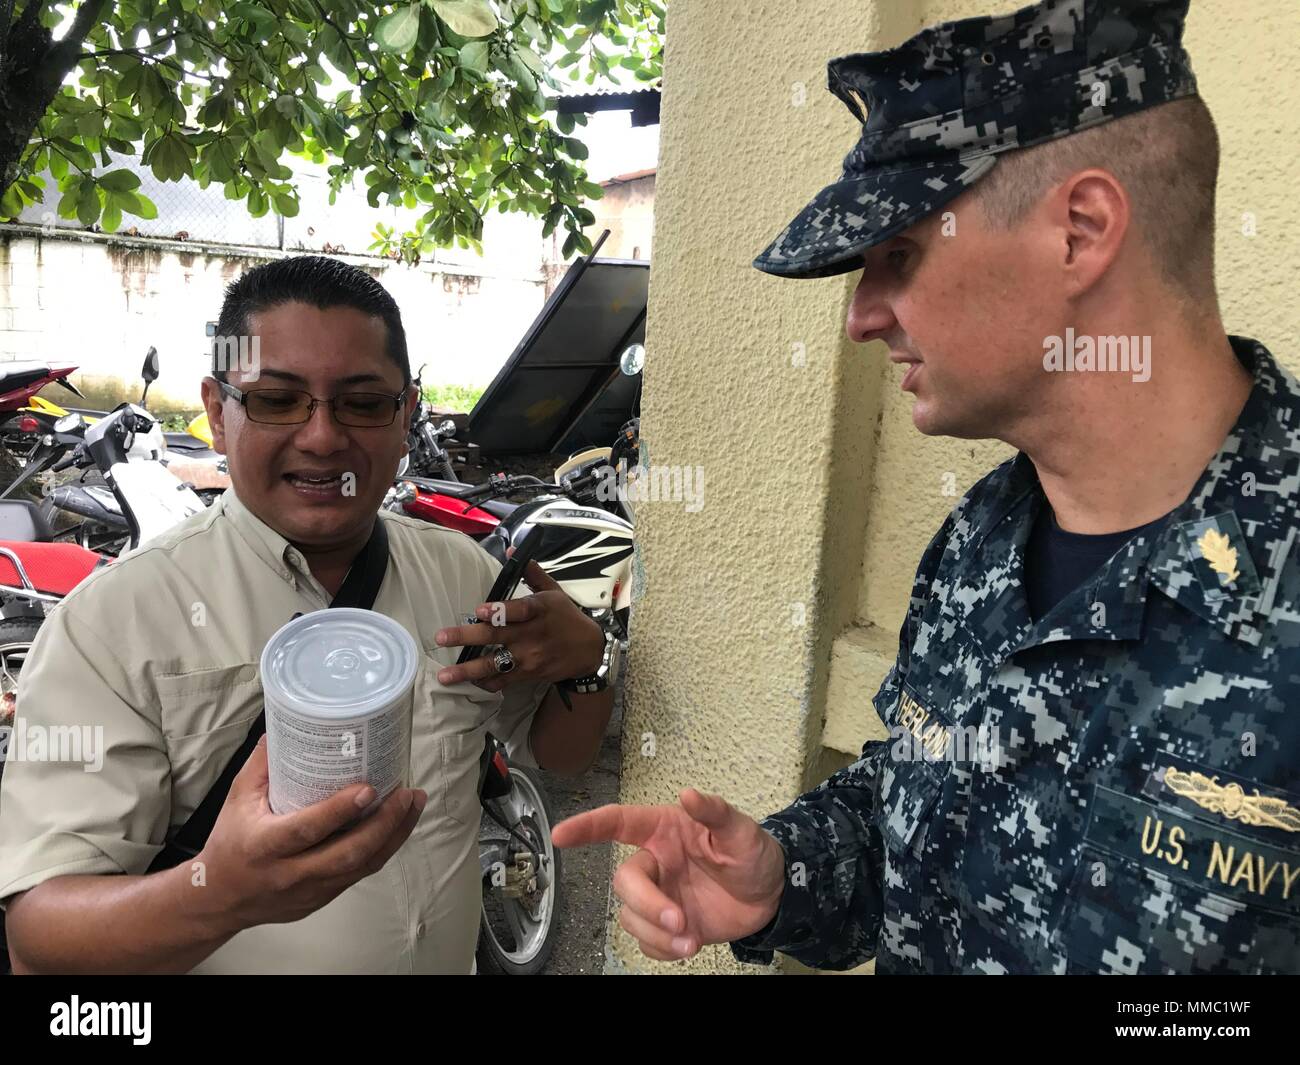 171006-A-QE286-0020 PUERTO BARRIOS, Guatemala (Oct. 6, 2017) Lt. Cmdr. Ian Sutherland, technical director for Navy Entomology Center of Excellence, donates mosquito repellant to a local entomologist at Clinico Salud Del Puerto Barrios, a local health clinic, during Southern Partnership Station 17 (SPS 17). SPS 17 is a U.S. Navy deployment executed by U.S. Naval Forces Southern Command/U.S. 4th Fleet, focused on subject matter expert exchanges with partner nation militaries and security forces in Central and South America. (U.S. Army photo by SPC Judge Jones/Released) Stock Photo